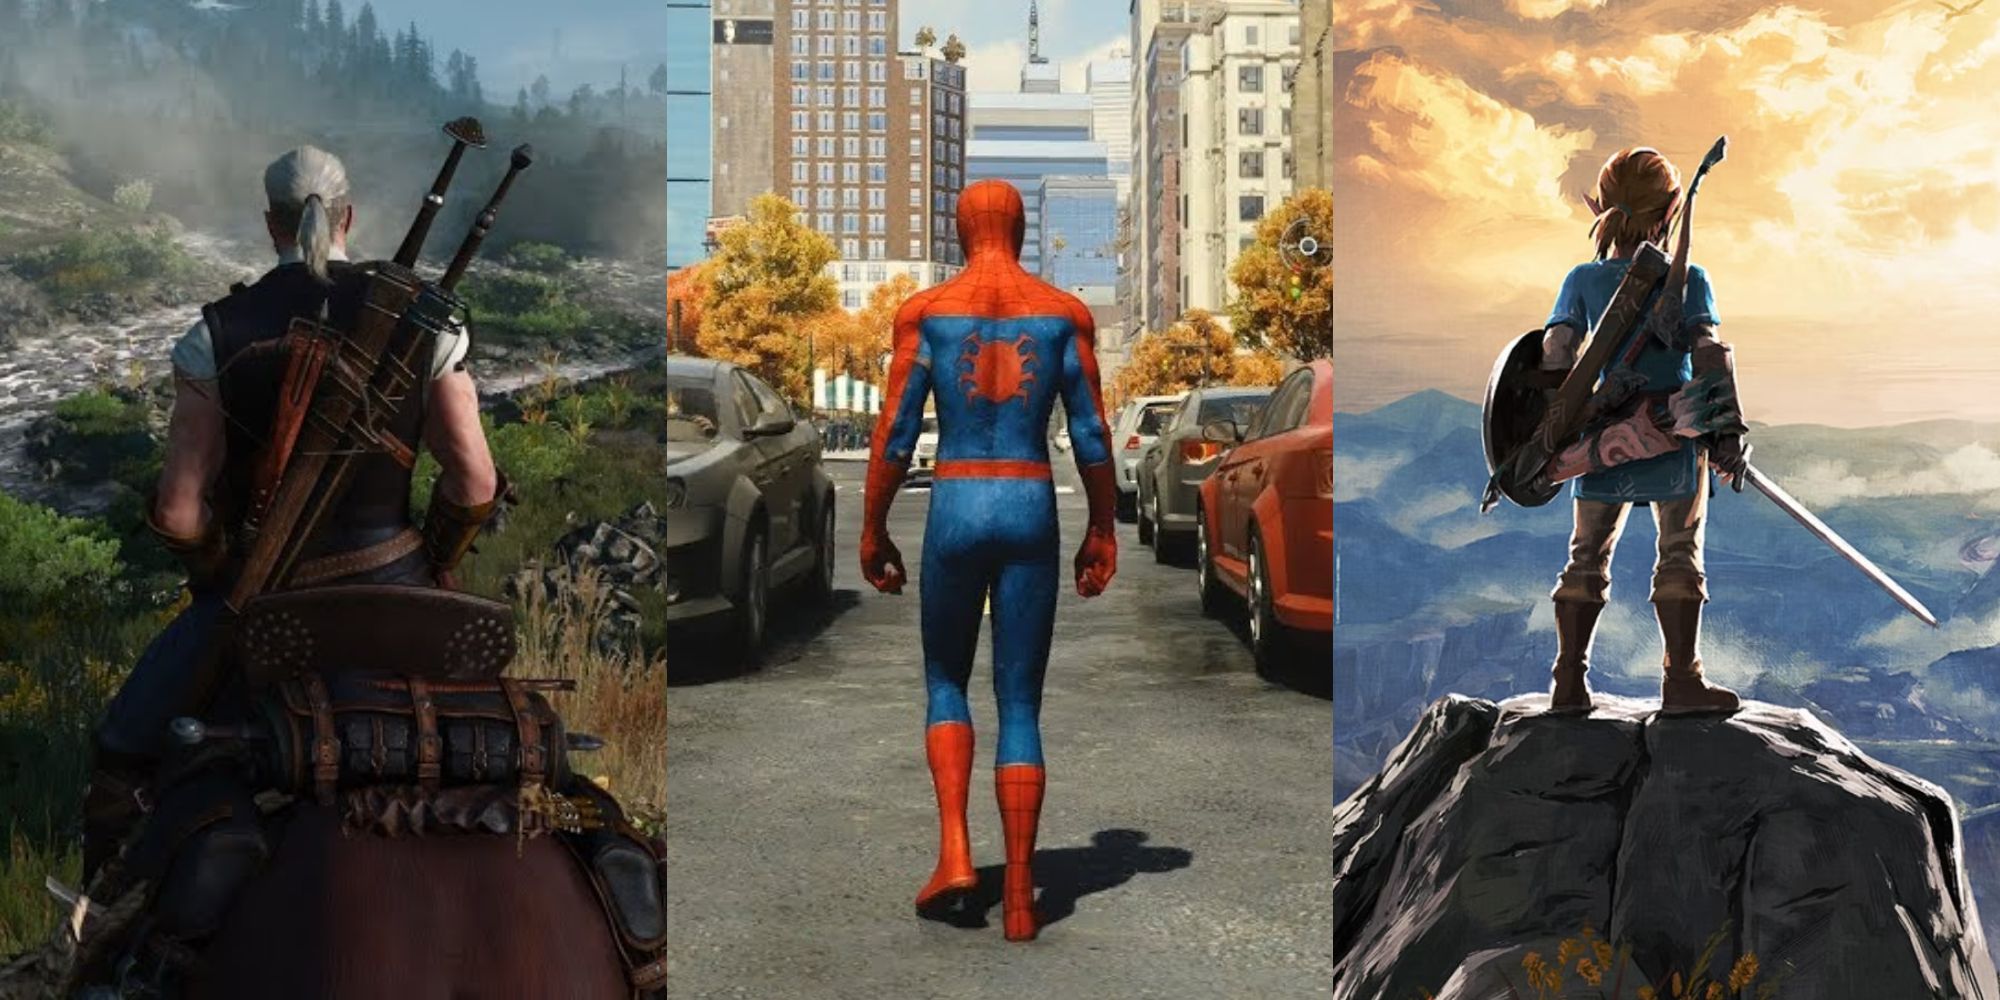 10 Open World Video Games That Feel Most Alive